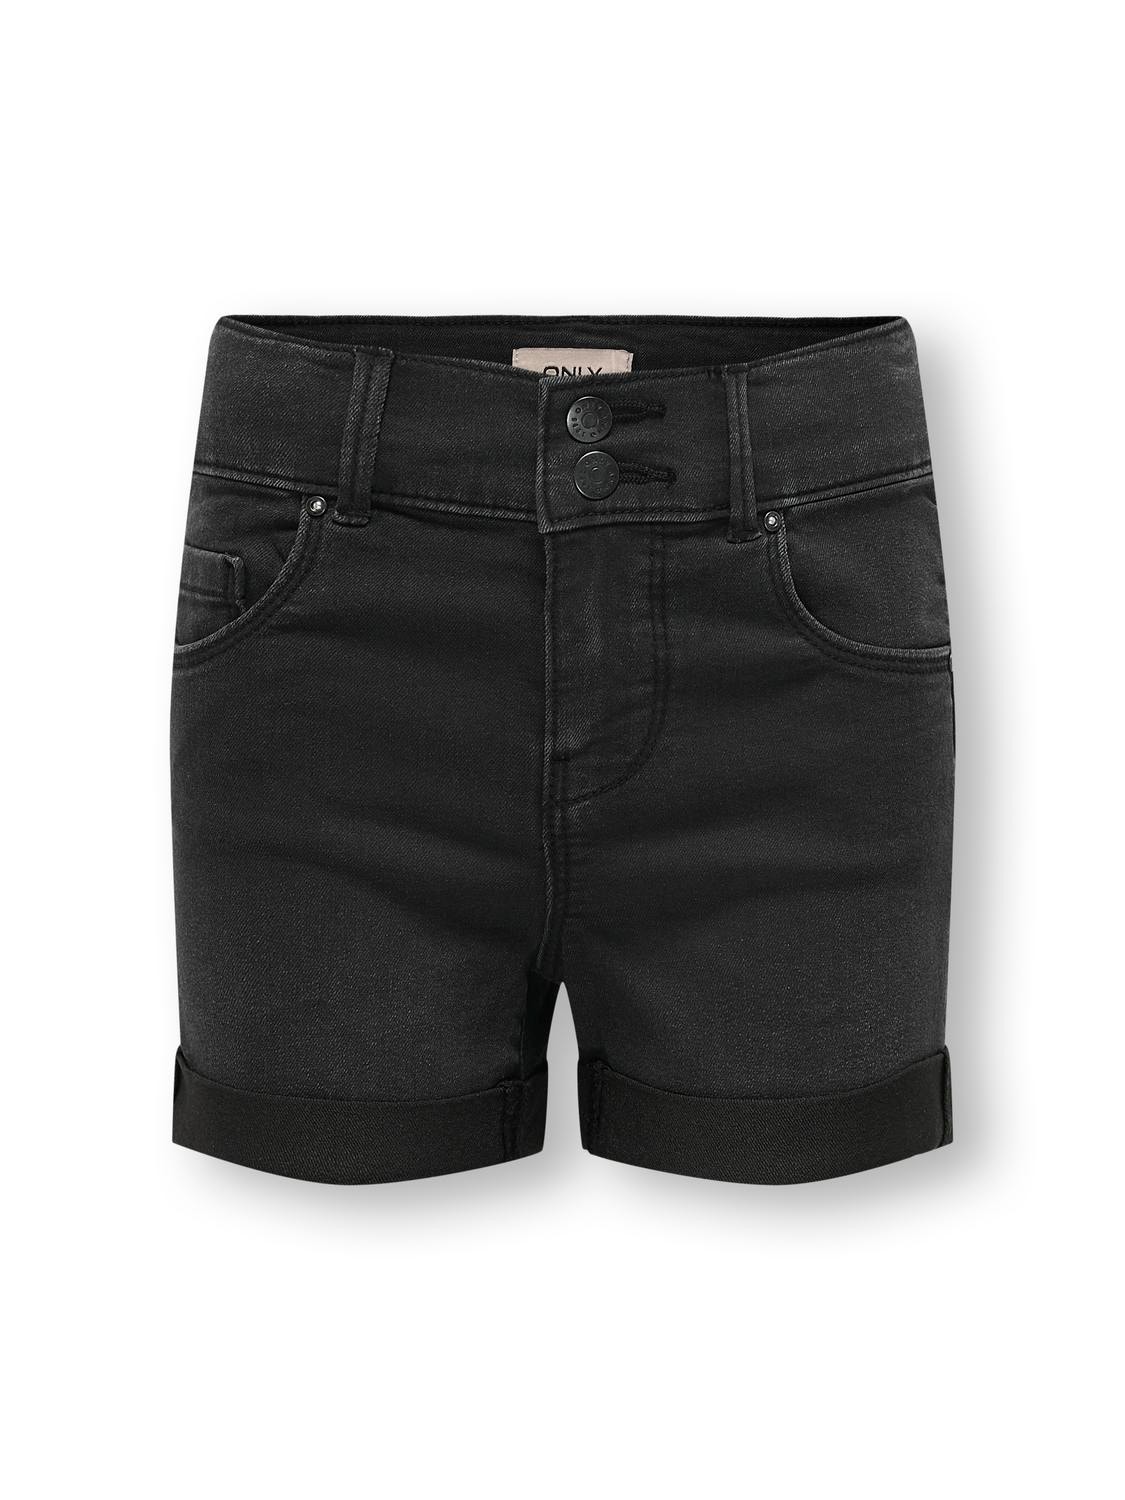 ONLY Shorts Skinny Fit Ourlets repliés -Black - 15280992